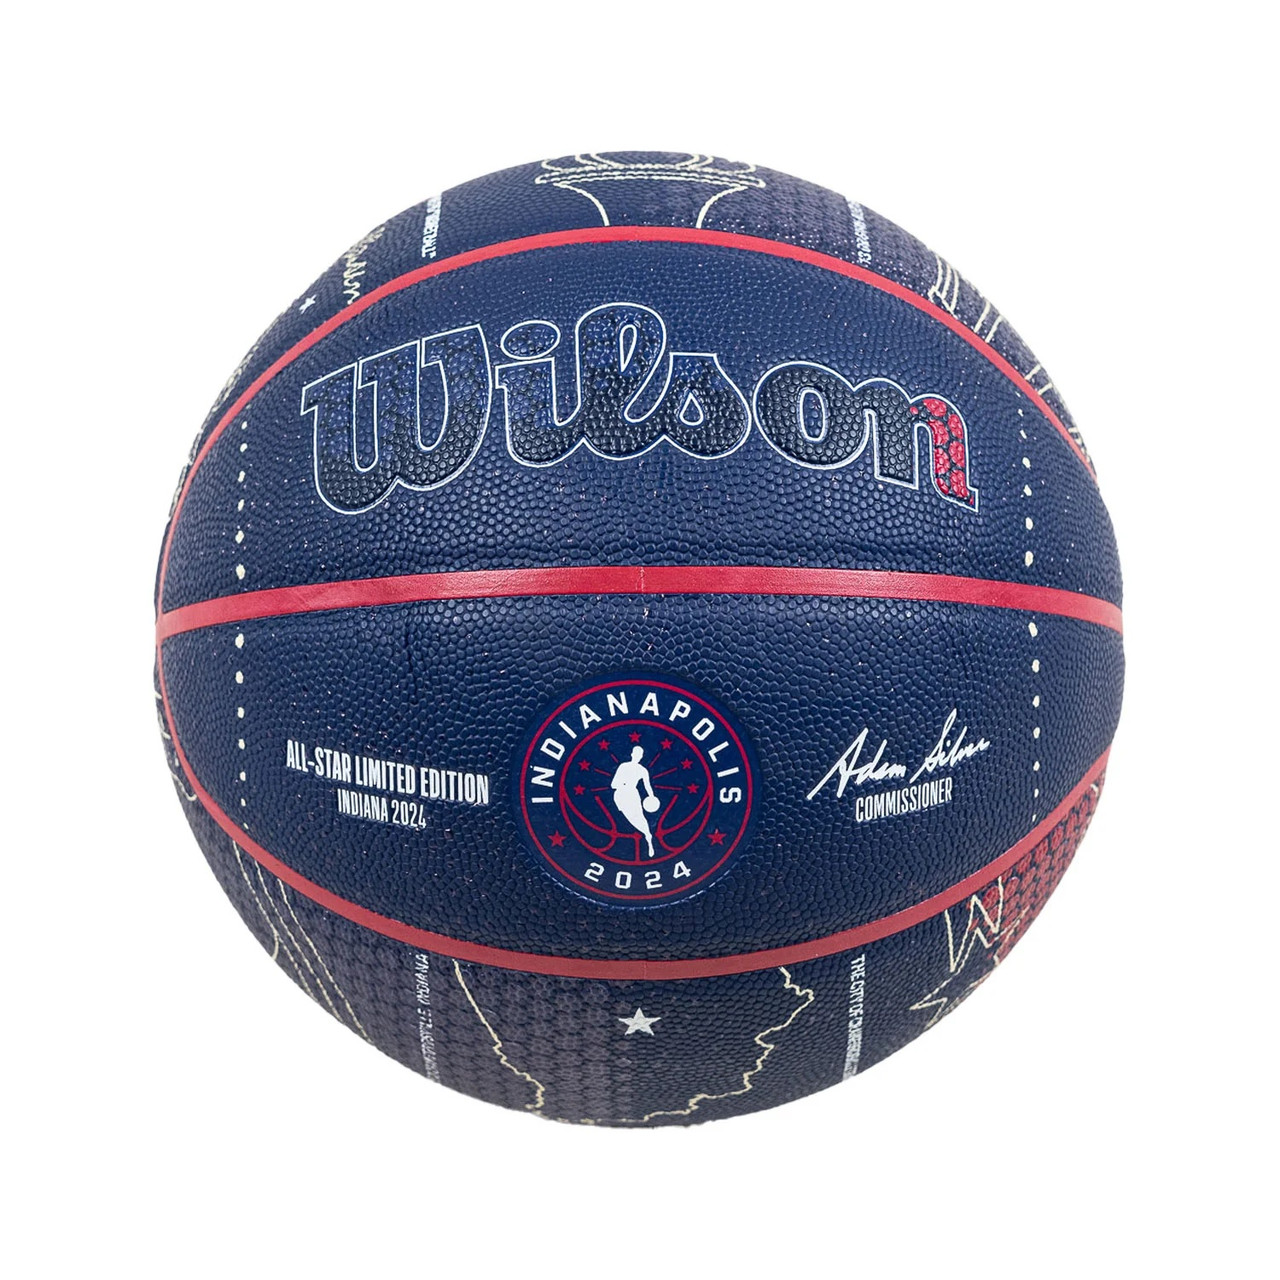 Wilson NBA Basketball Team Tribute Clippers Ball (Size 7)